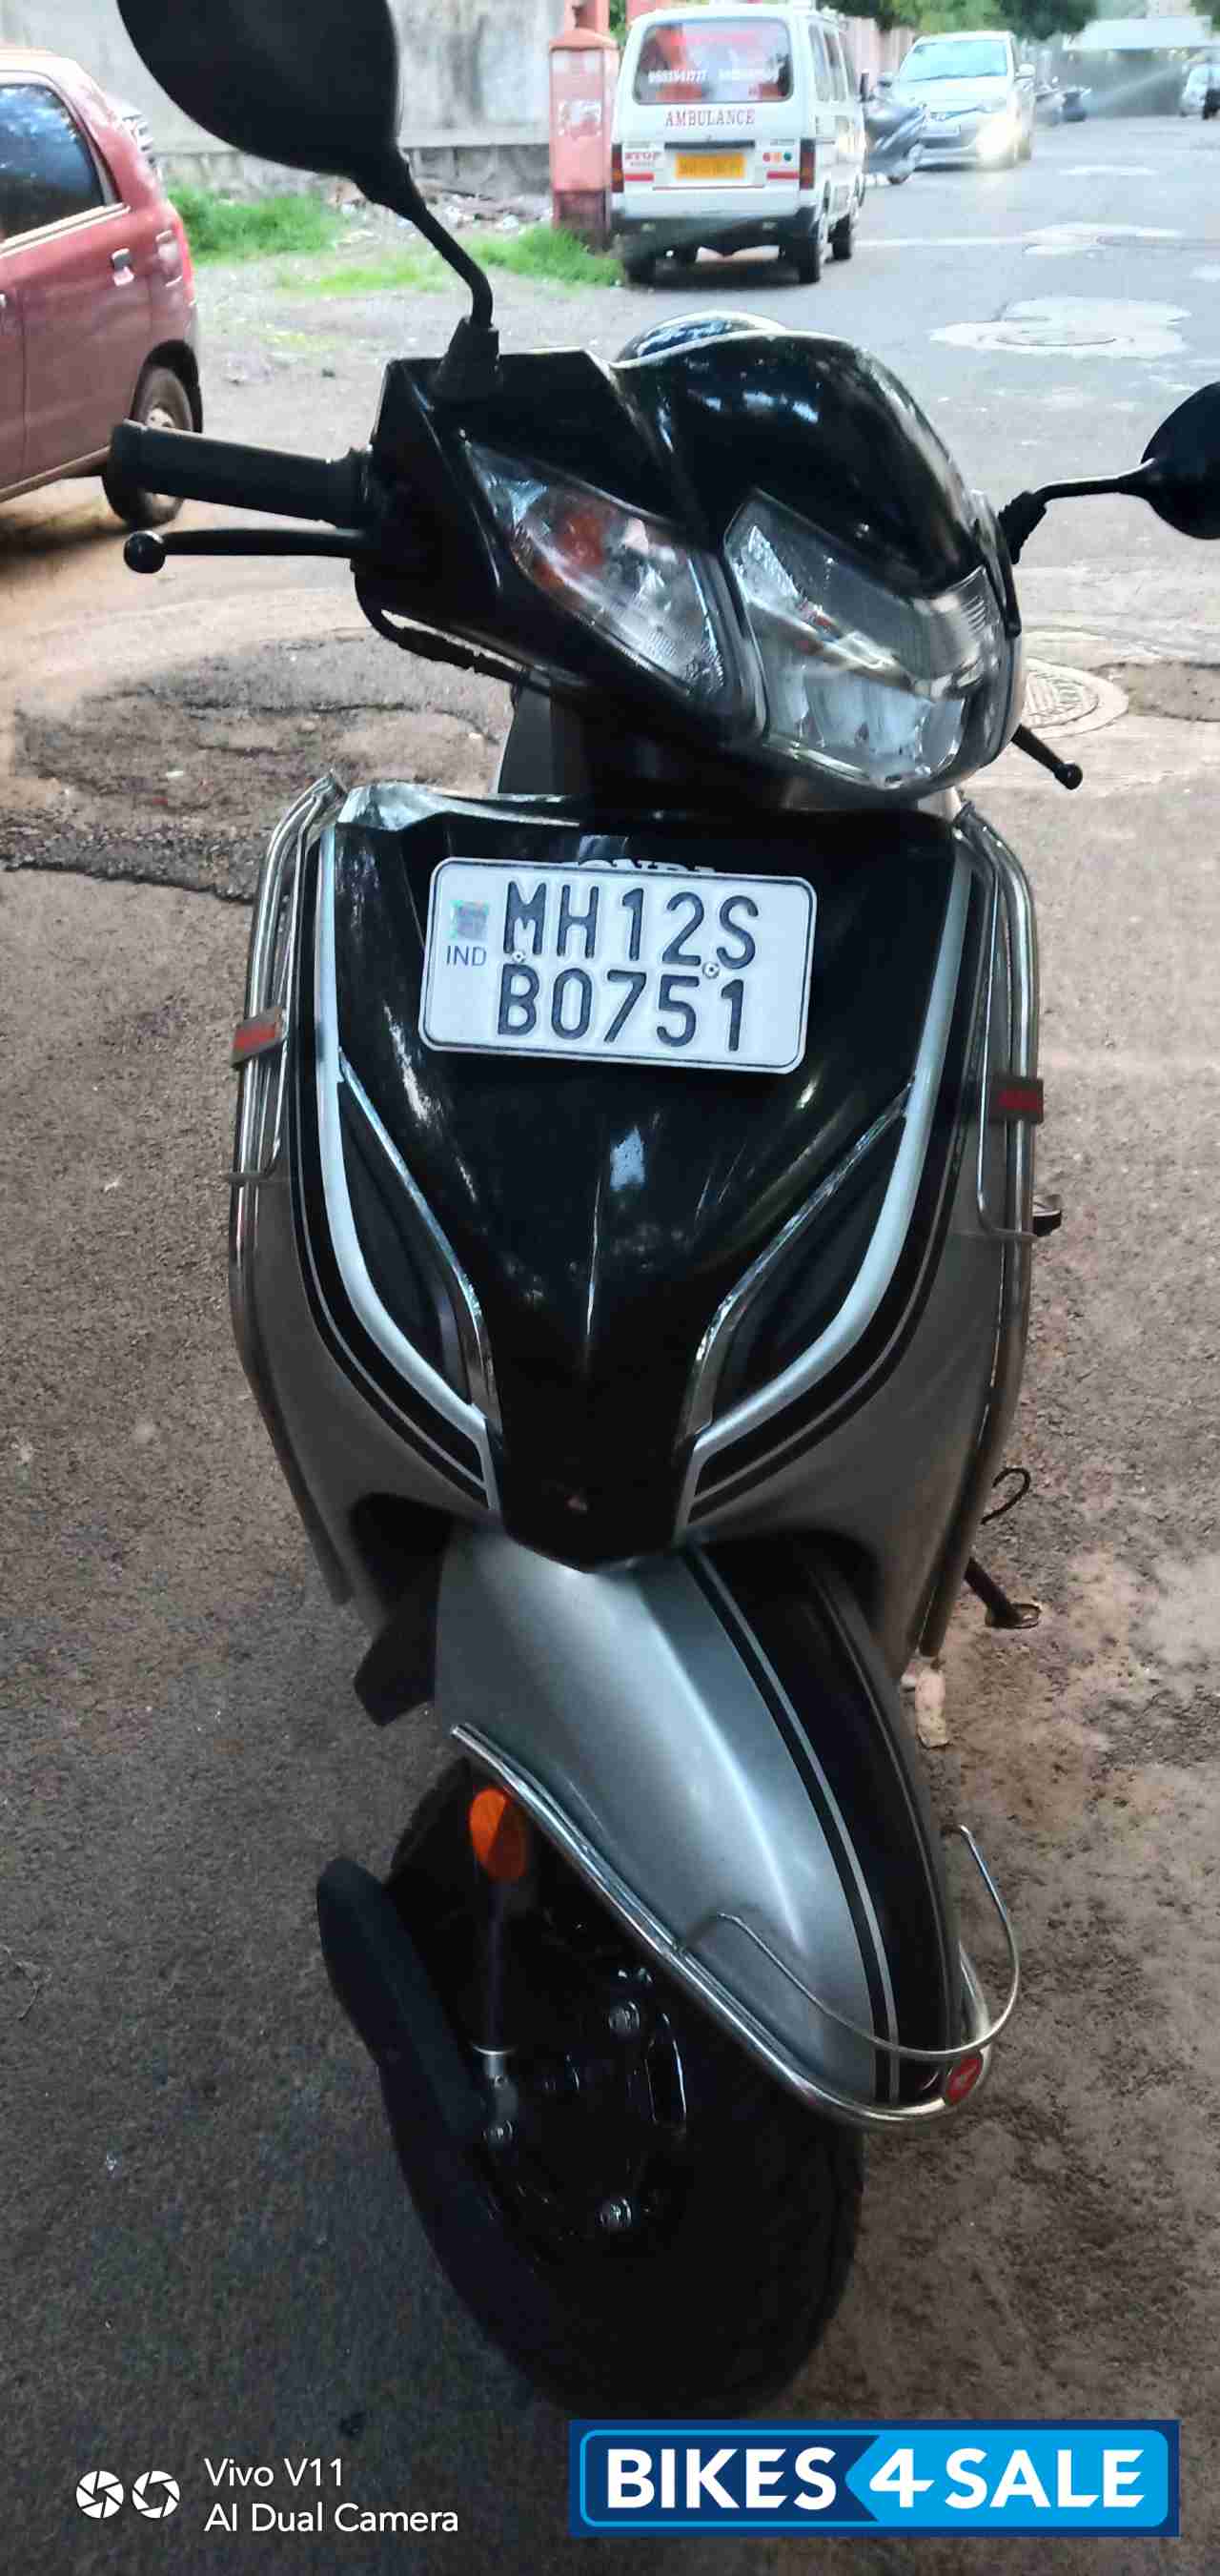 Used 2019 model Honda Activa 5G Limited Edition for sale in Pune. ID